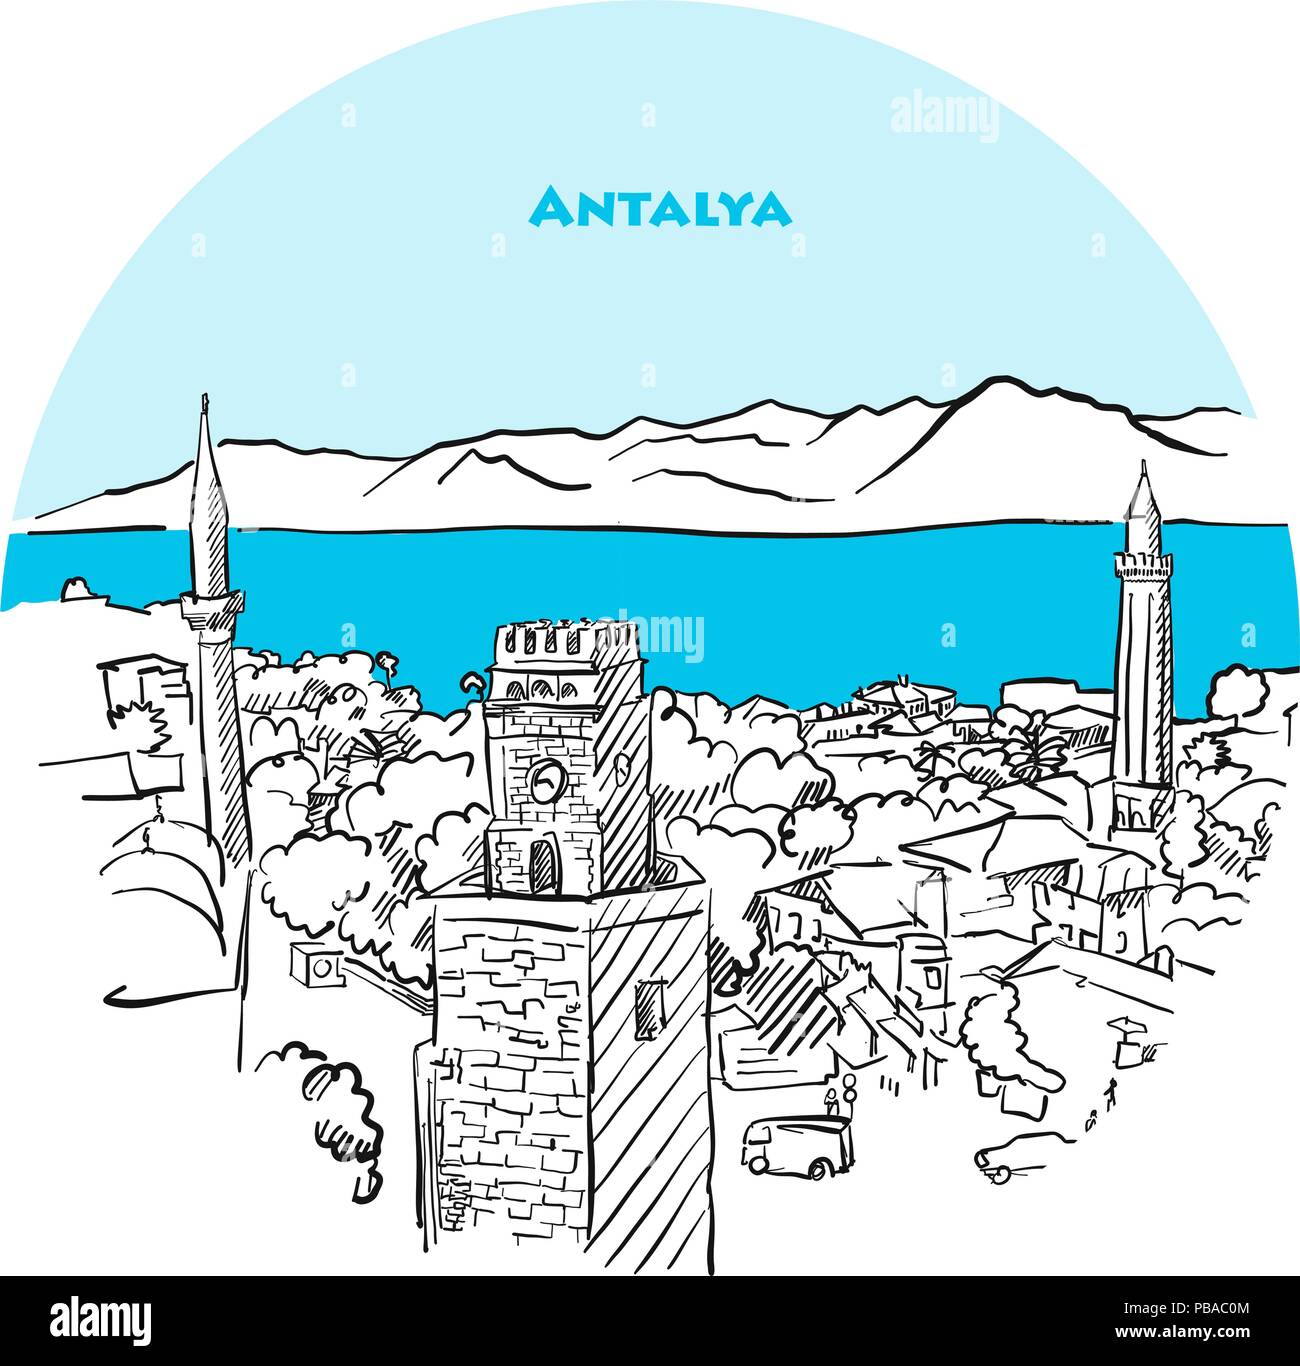 Antalya two toned drawing. Hand-drawn vector illustration of Antalya old town with blue sea in background. Stock Vector